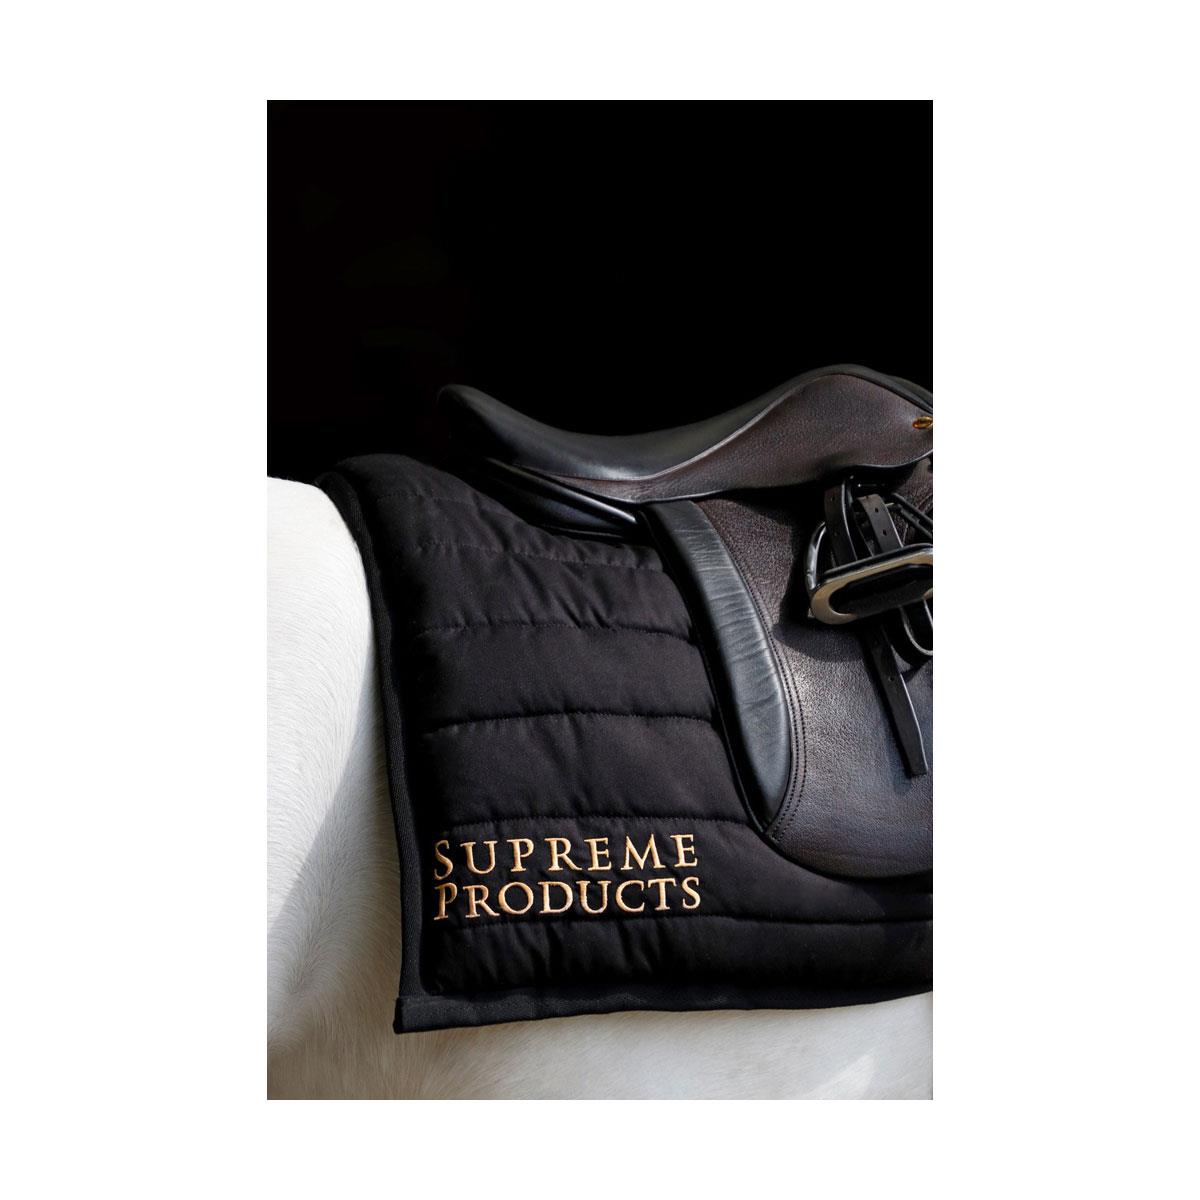 Supreme Products Exercise Pad - Just Horse Riders